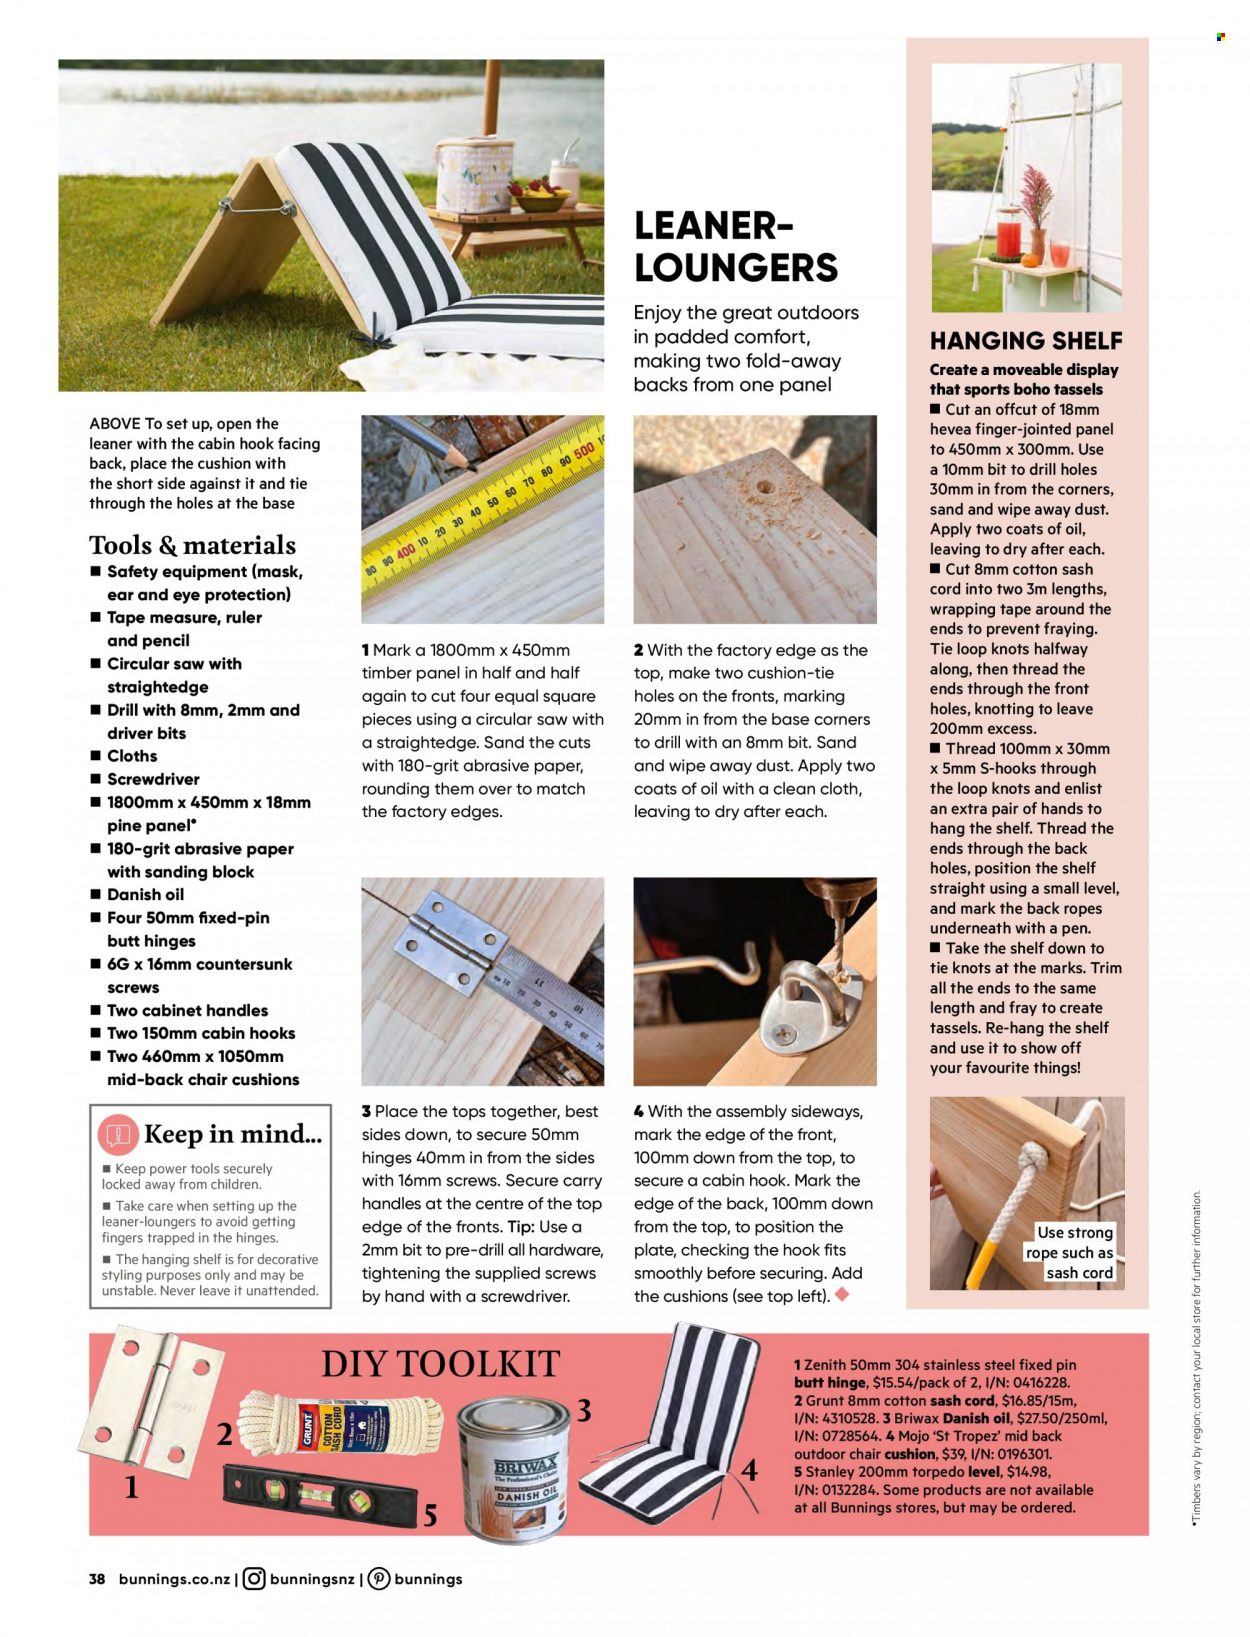 thumbnail - Bunnings Warehouse mailer - Sales products - cabinet, chair, cushion, hook, chair pad, Stanley, screwdriver, power tools, circular saw, saw, measuring tape. Page 38.